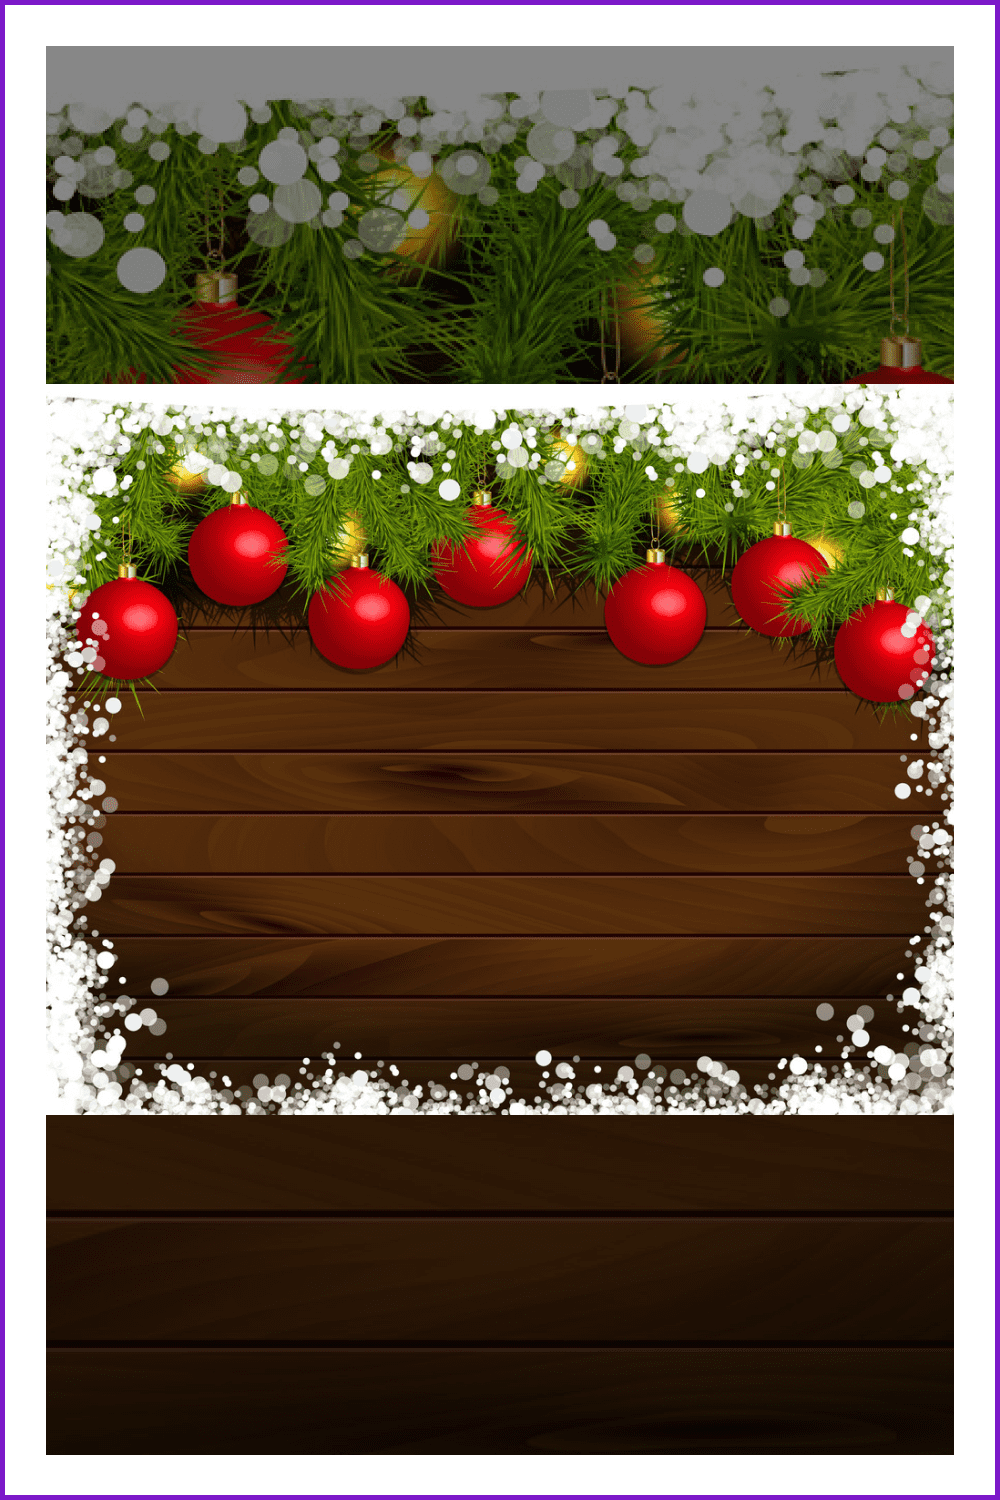 Image of red Christmas toys and Christmas tree branches on the background of brown boards.